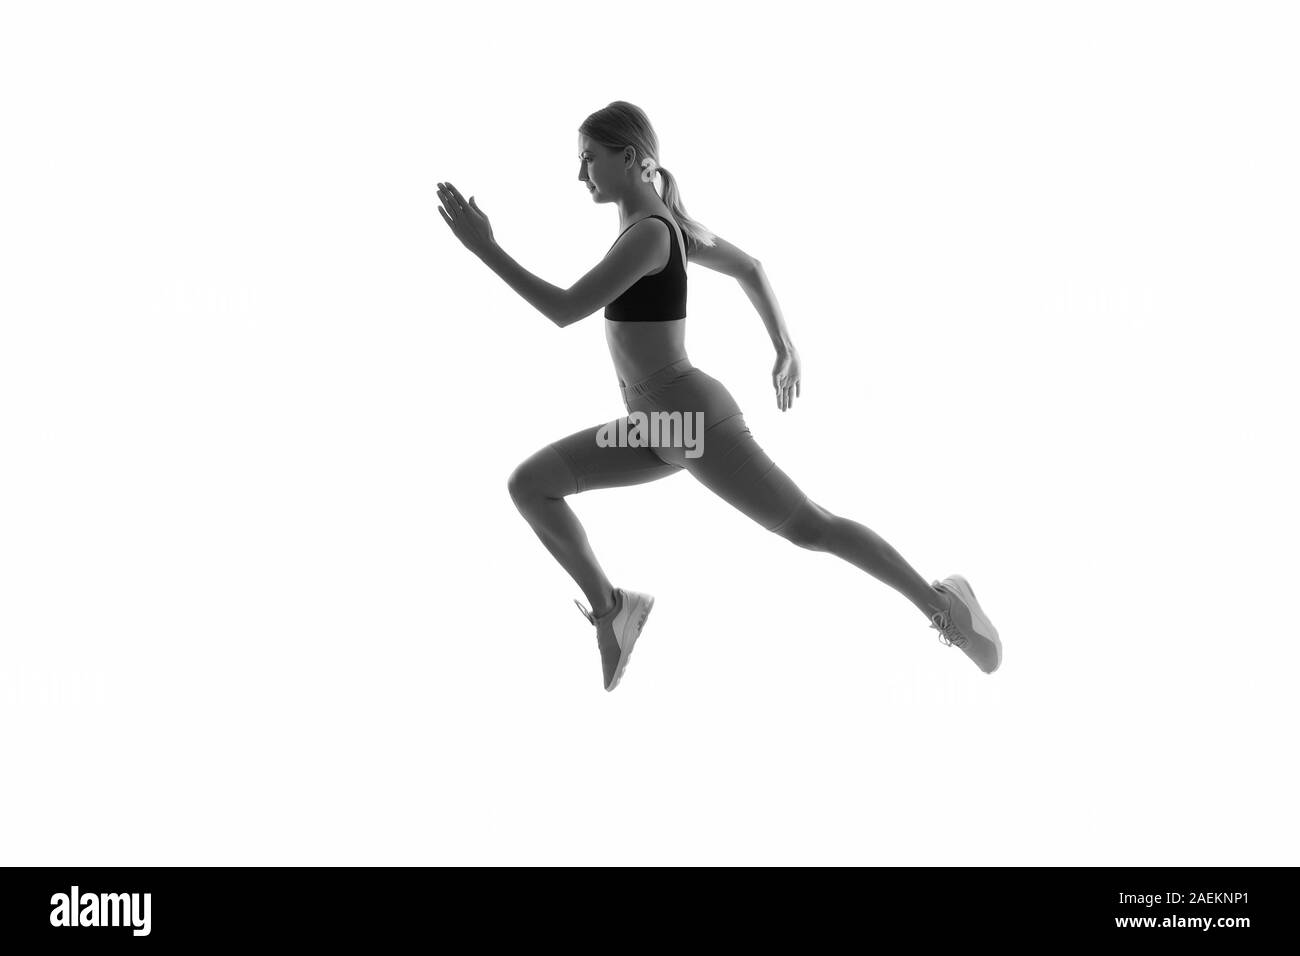 Girl runner on white background. Sport lifestyle and health concept. Start run. Life is motion. Woman athlete run achieve great result. How run faster. Speed training guide. Improve run speed. Stock Photo